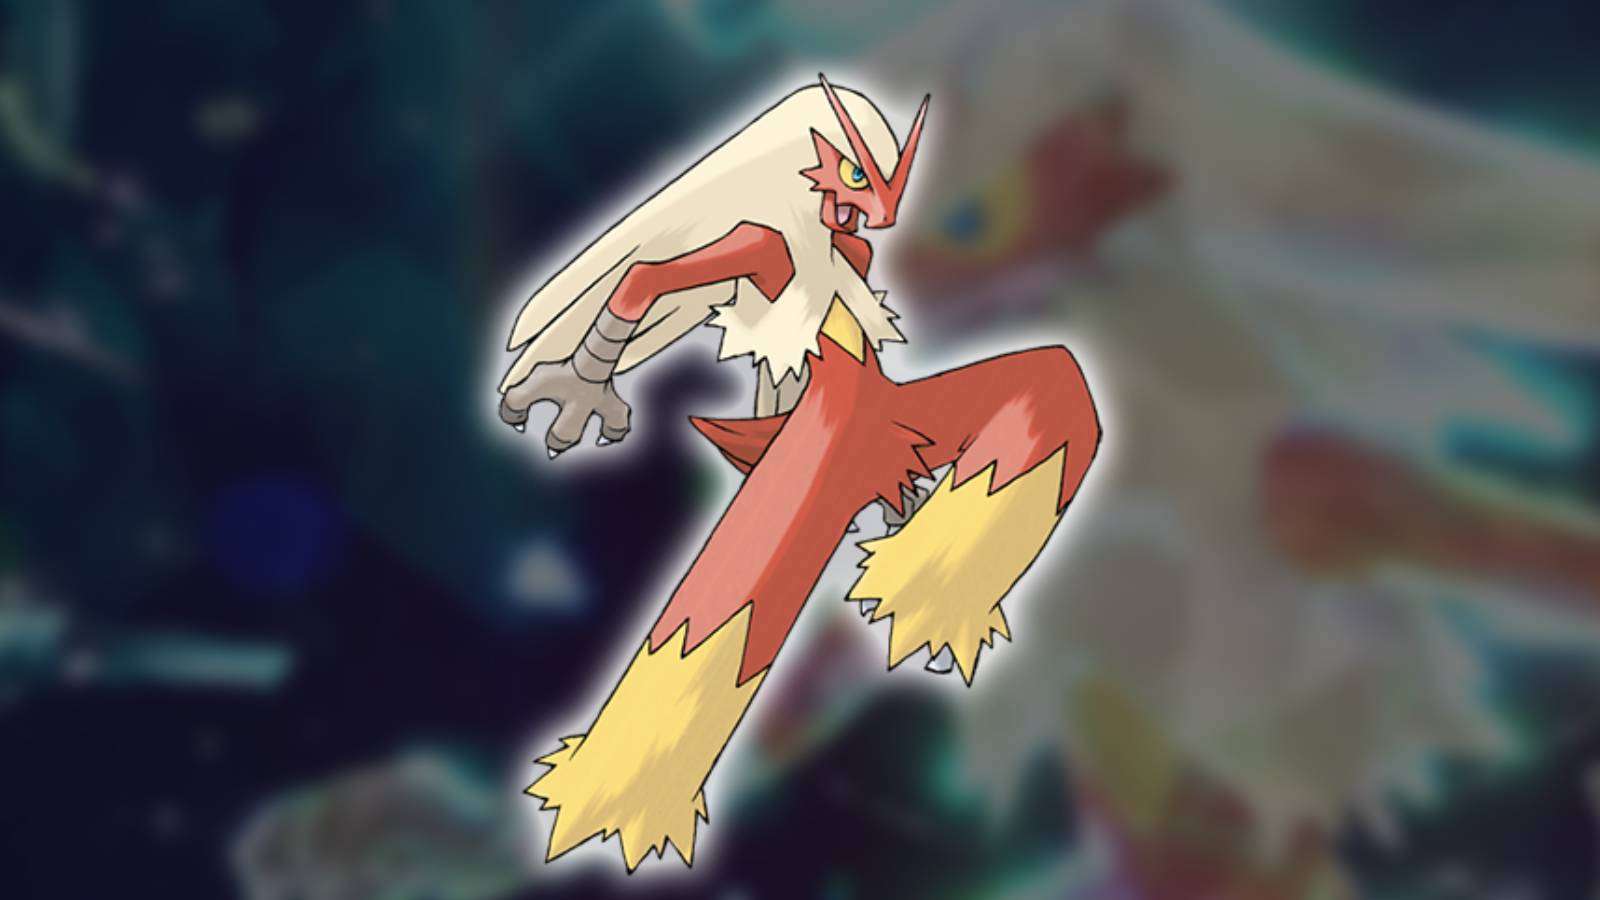 The Pokemon Blaziken is visible against a blurred background